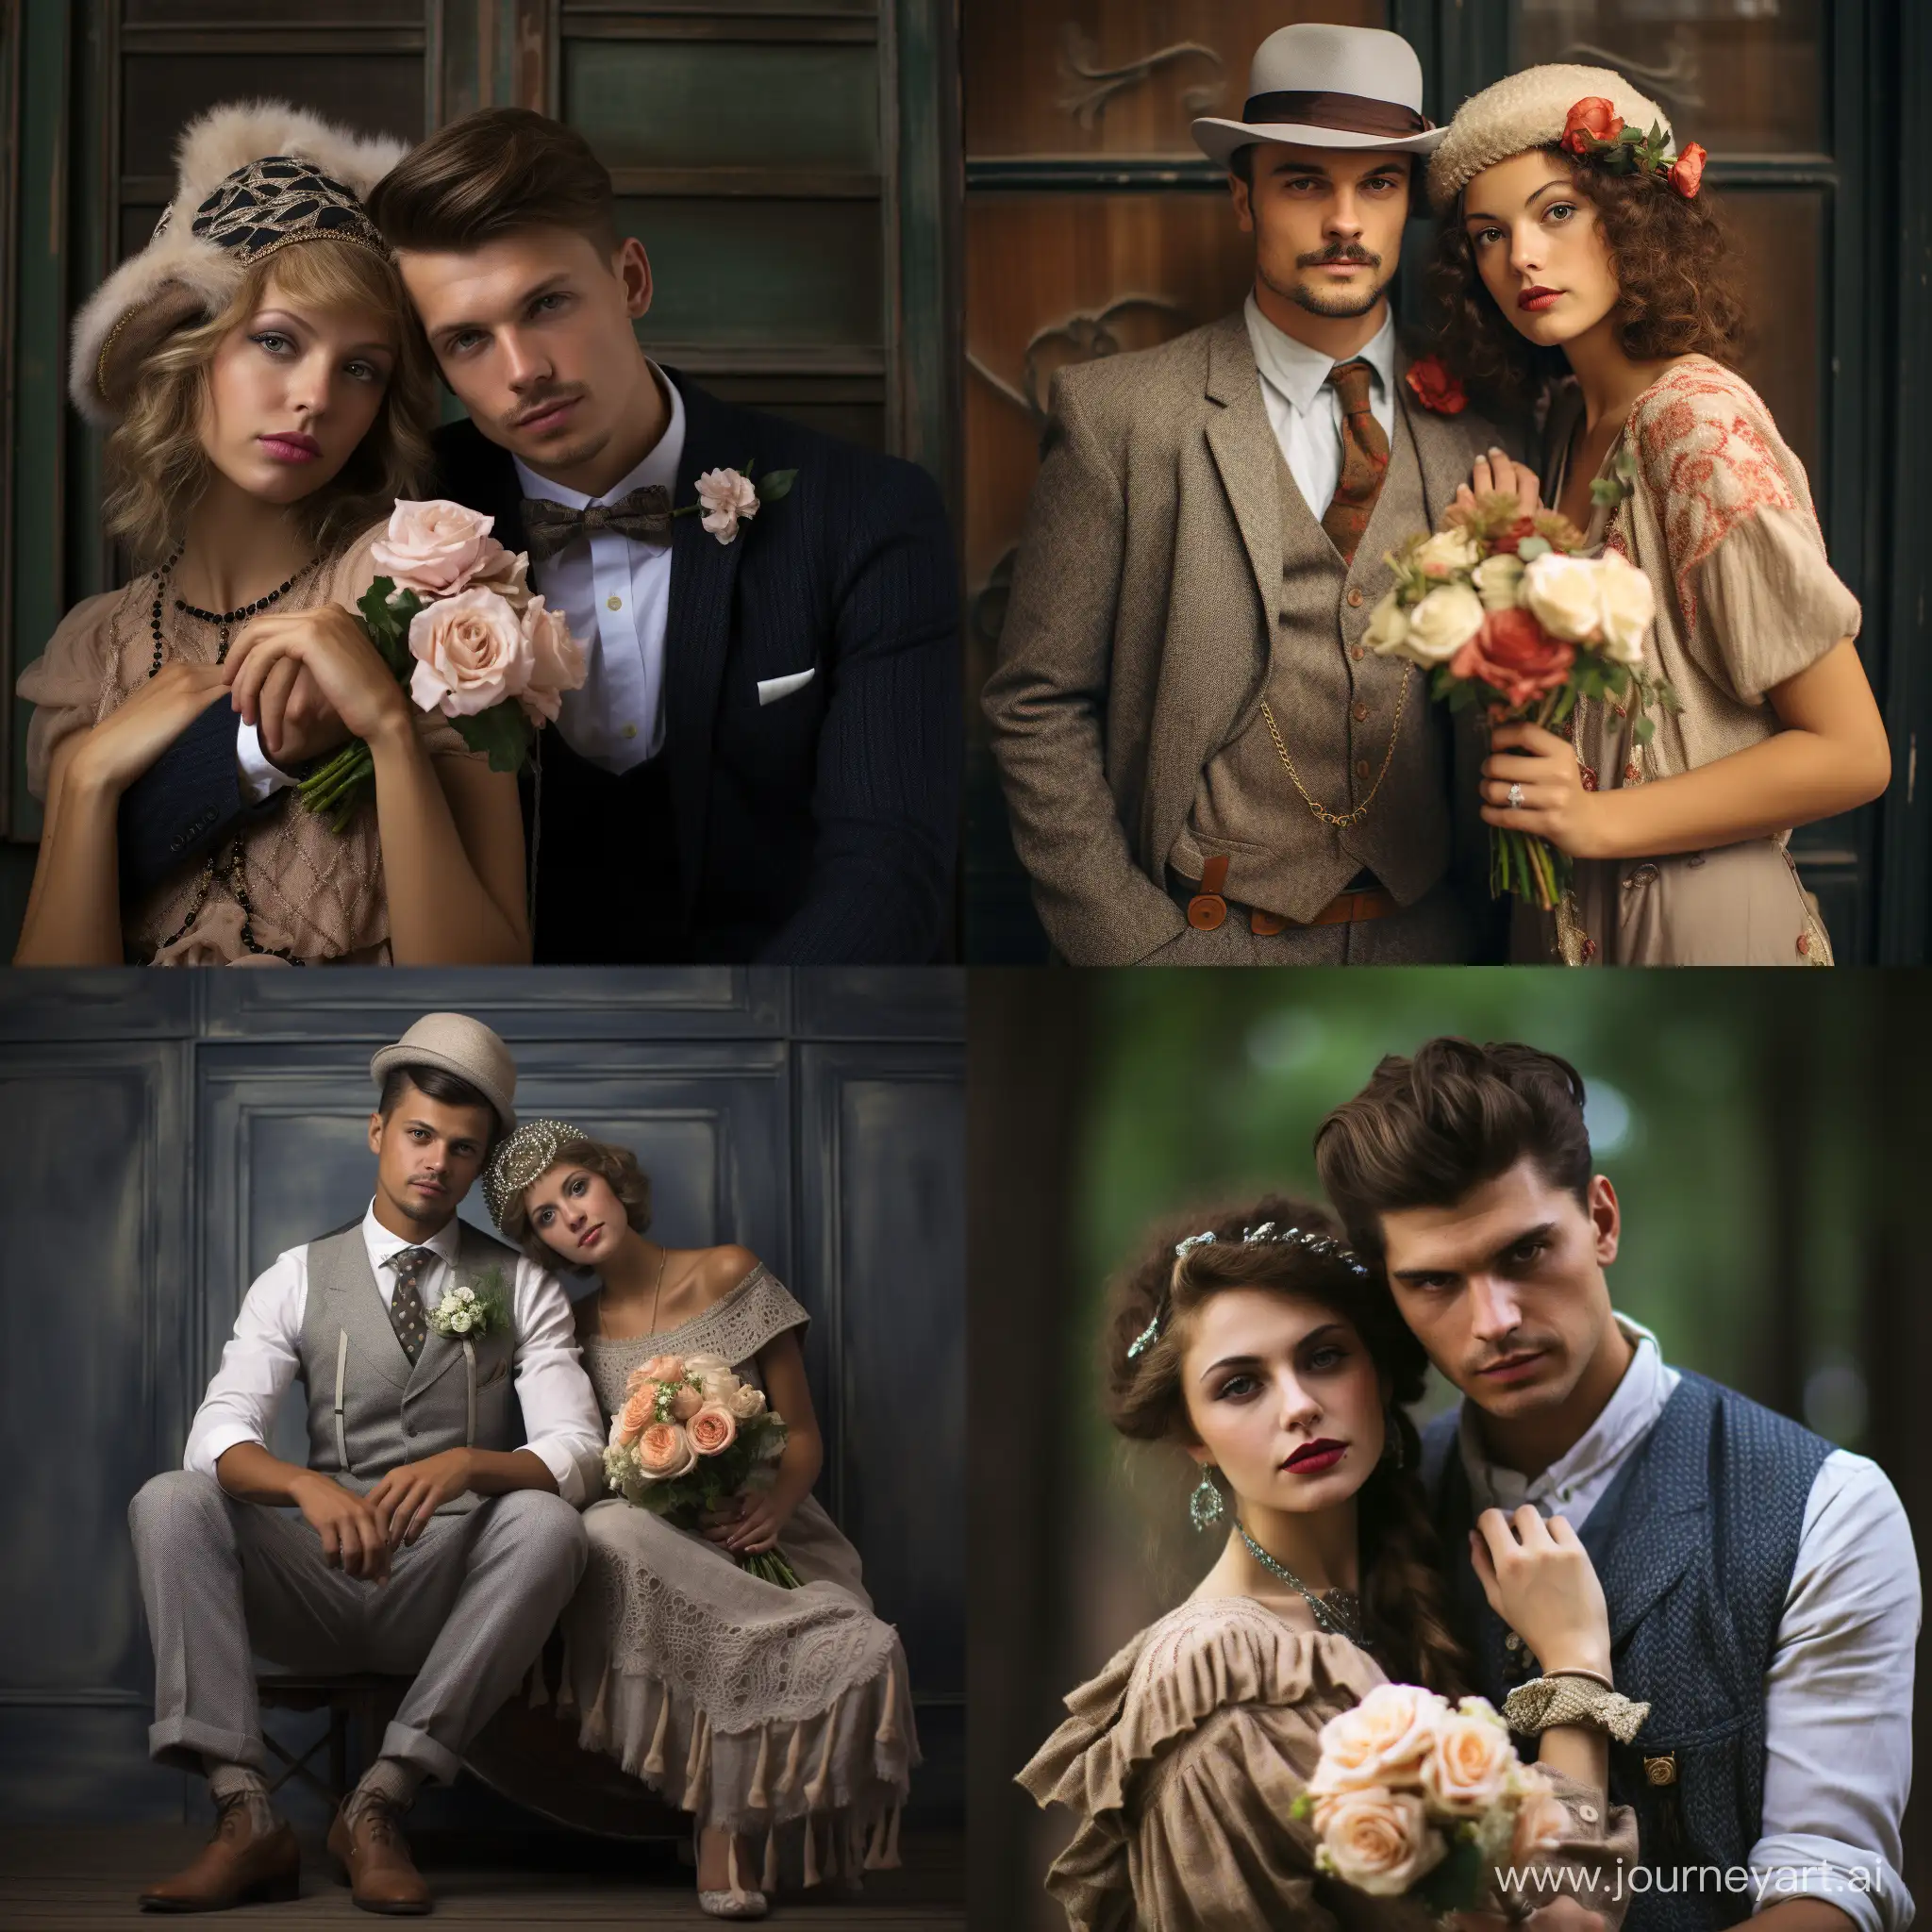 Married young French couple dressed in 1920s bohemian fashion